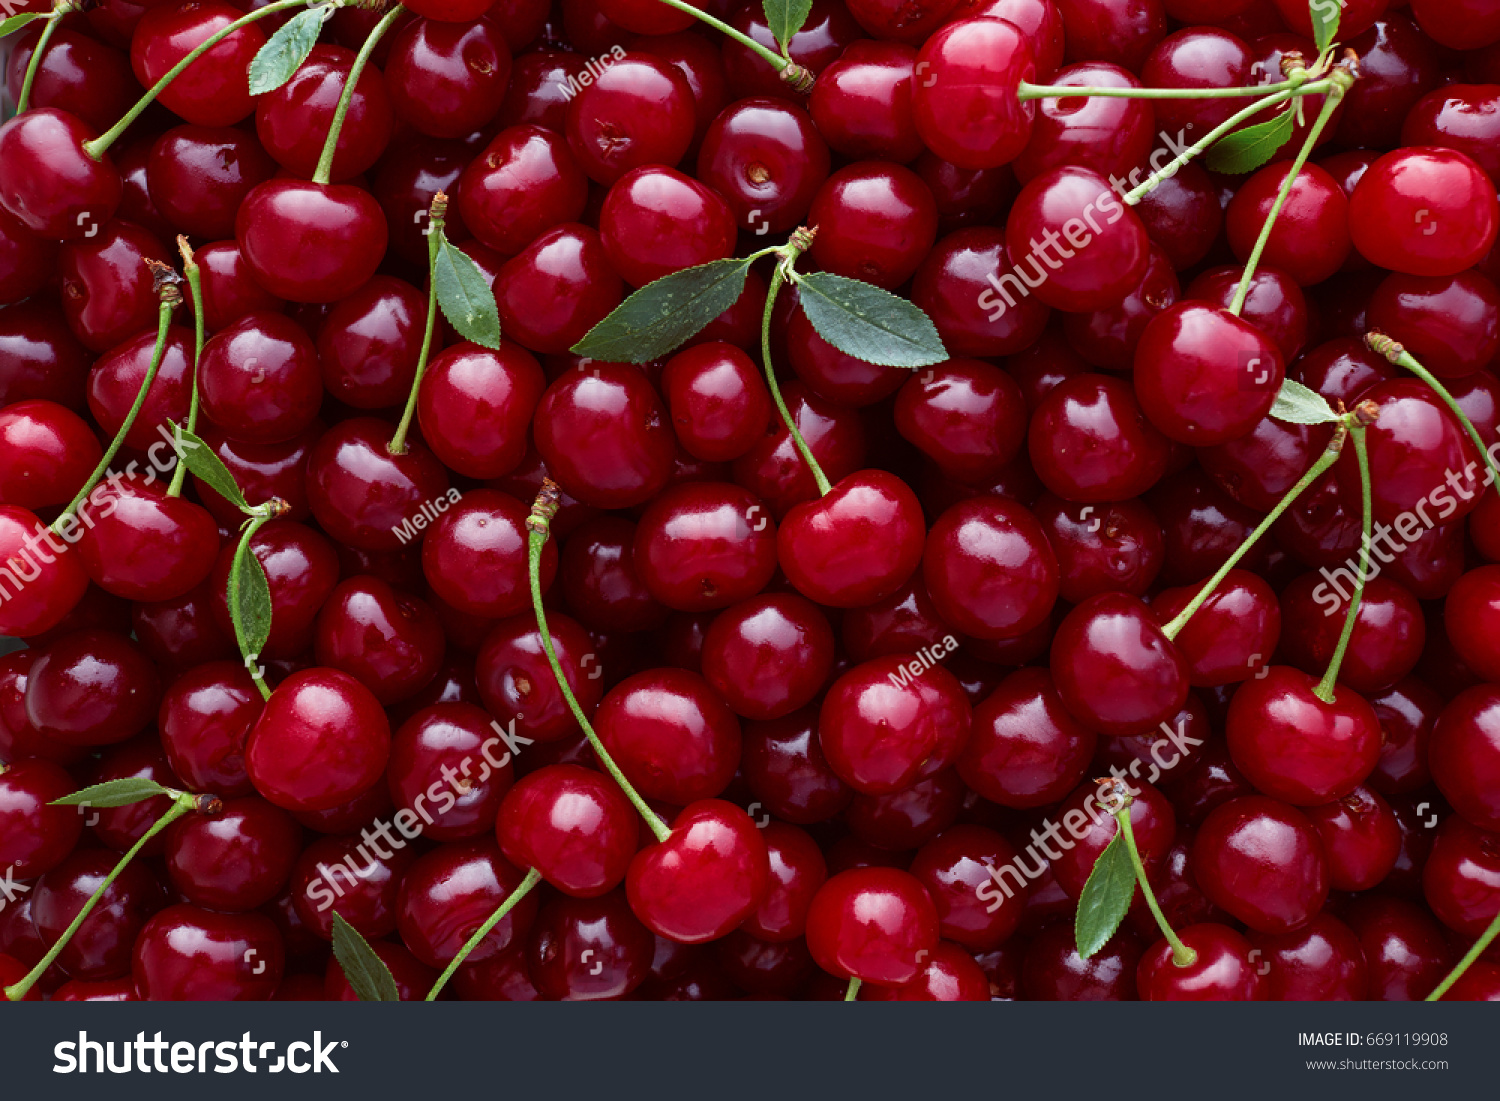 Close up of pile of ripe cherries with stalks and leaves. Large collection of fresh red cherries. Ripe cherries background.  #669119908